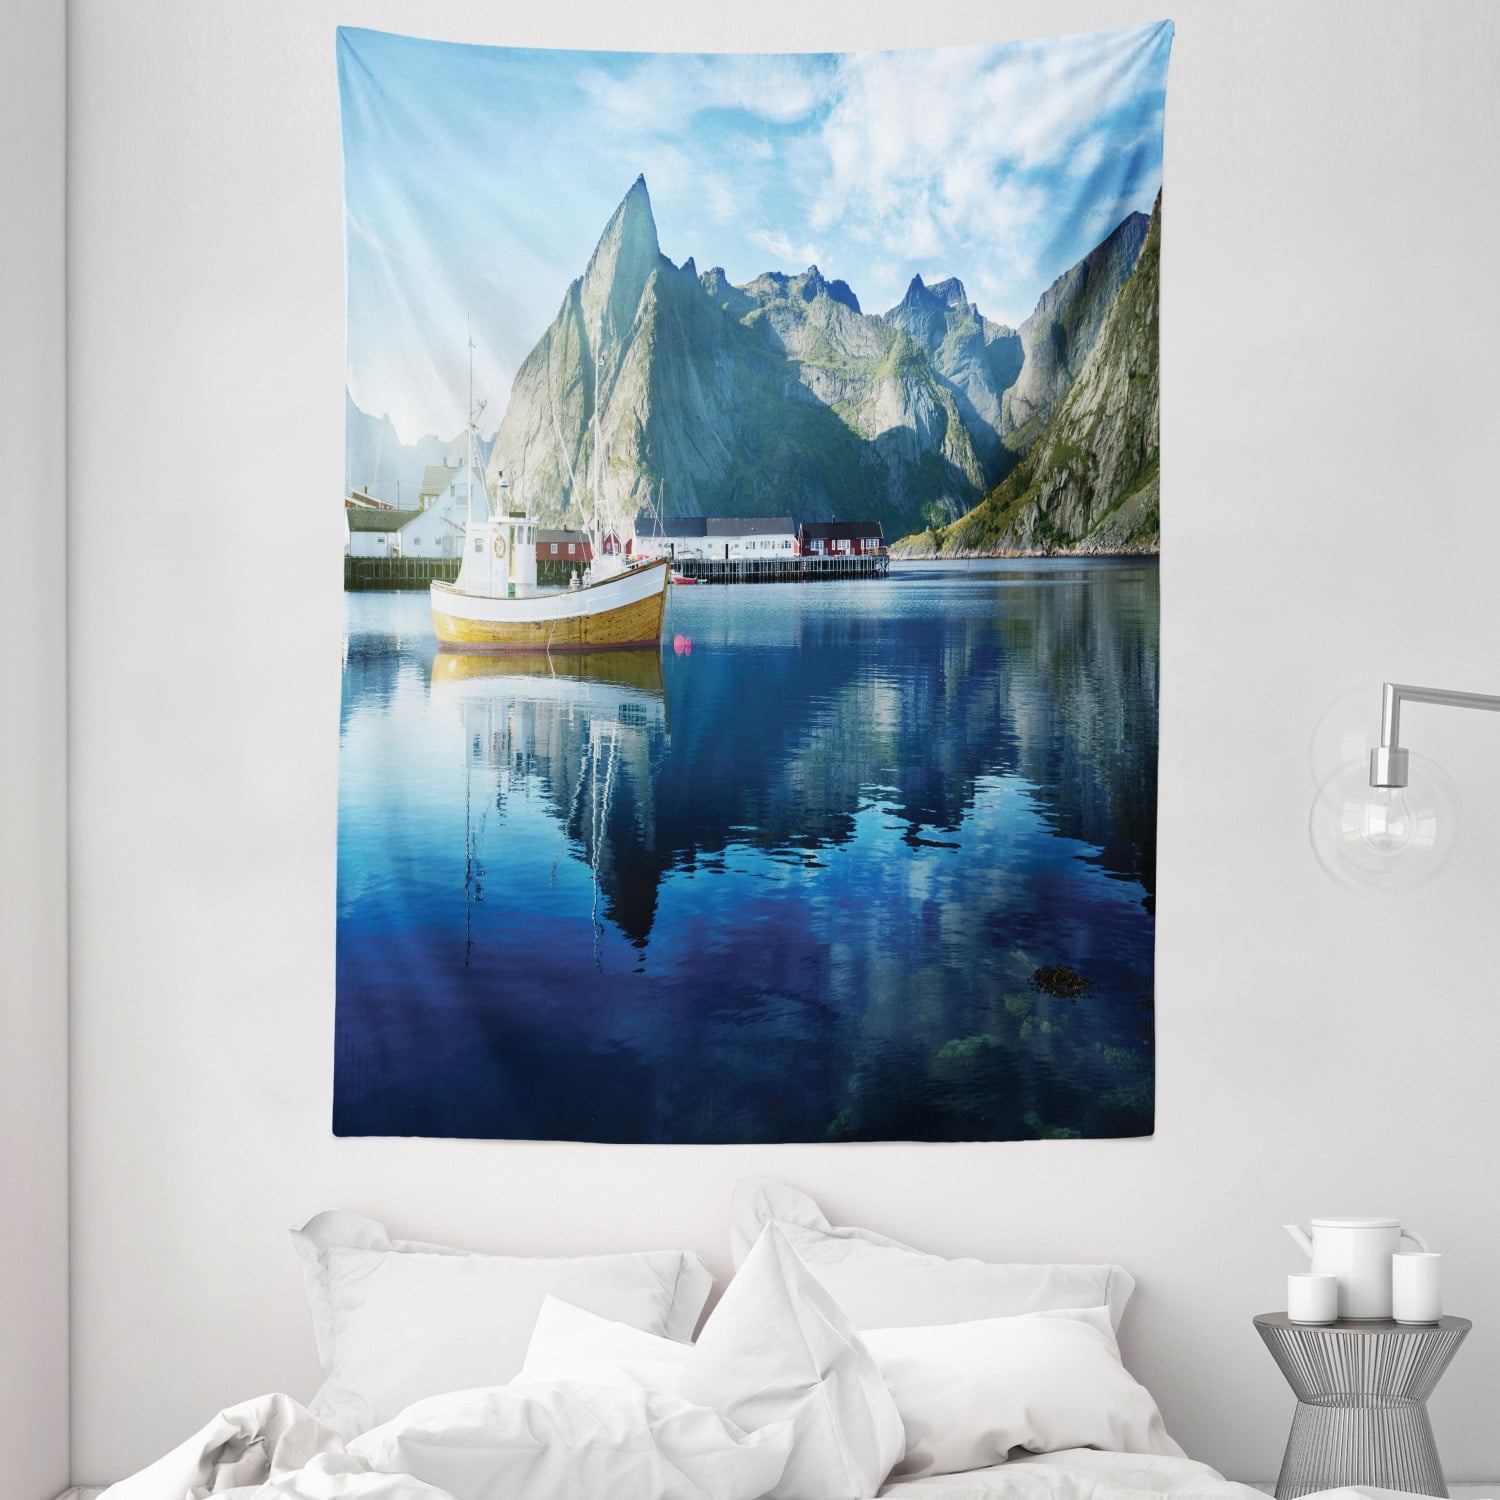 40 W x 60 L Inches Blue Sunset in Norwegian Lake by Fjords Formation Yacht Fishing Arctic Harbor Island Ambesonne Farm House Decor Tapestry Wall Hanging for Bedroom Living Room Dorm 